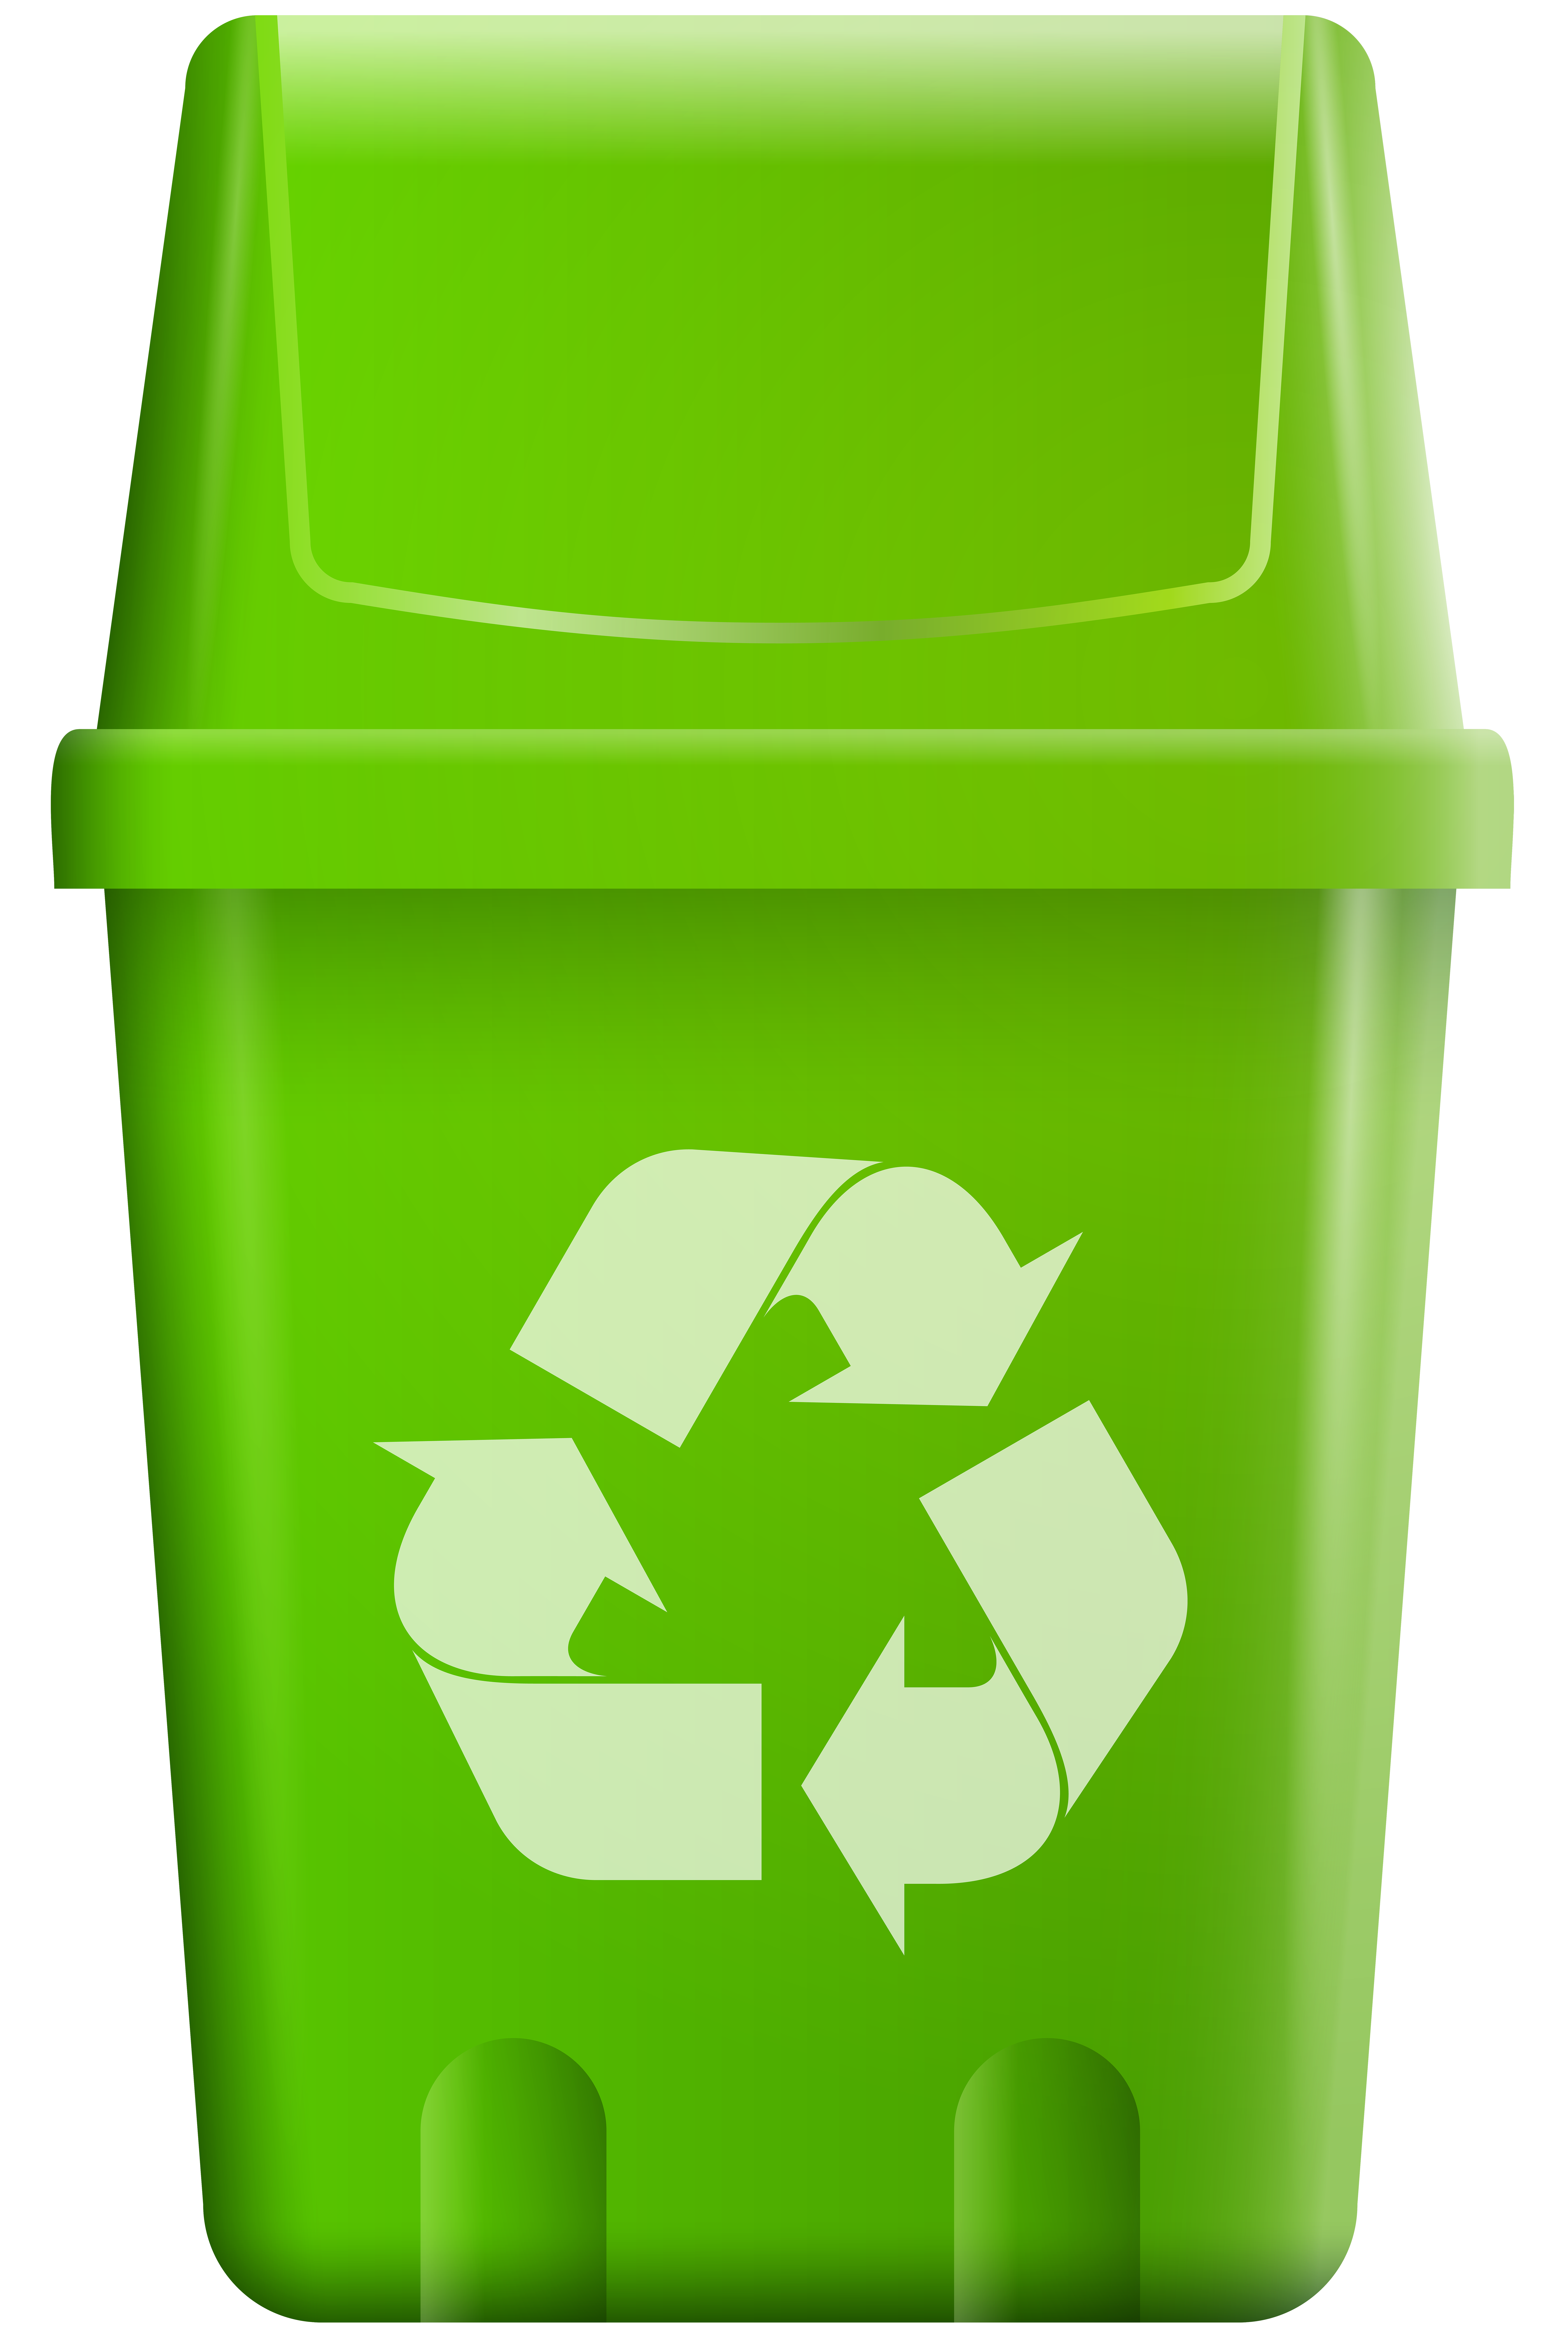 Trash Bin with Recycle Symbol PNG Clip Art